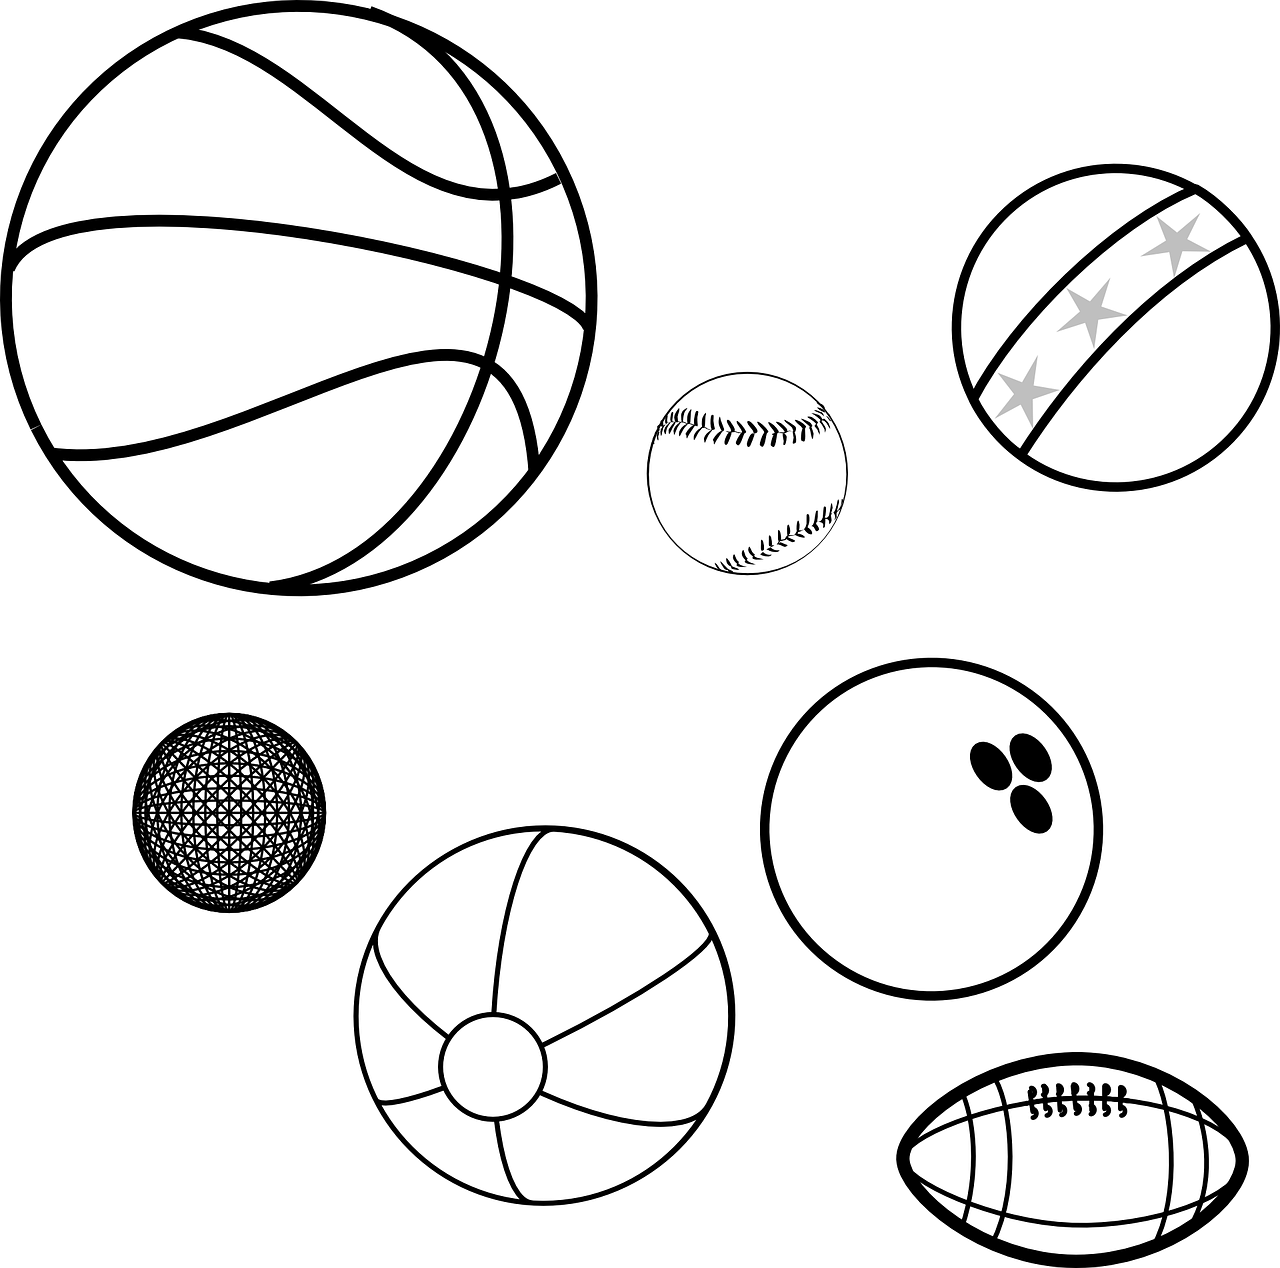 a couple of balls that are flying in the air, lineart, inspired by Ion Andreescu, pixabay, digital art, baseball, three moons, dark negative space, rule of threes